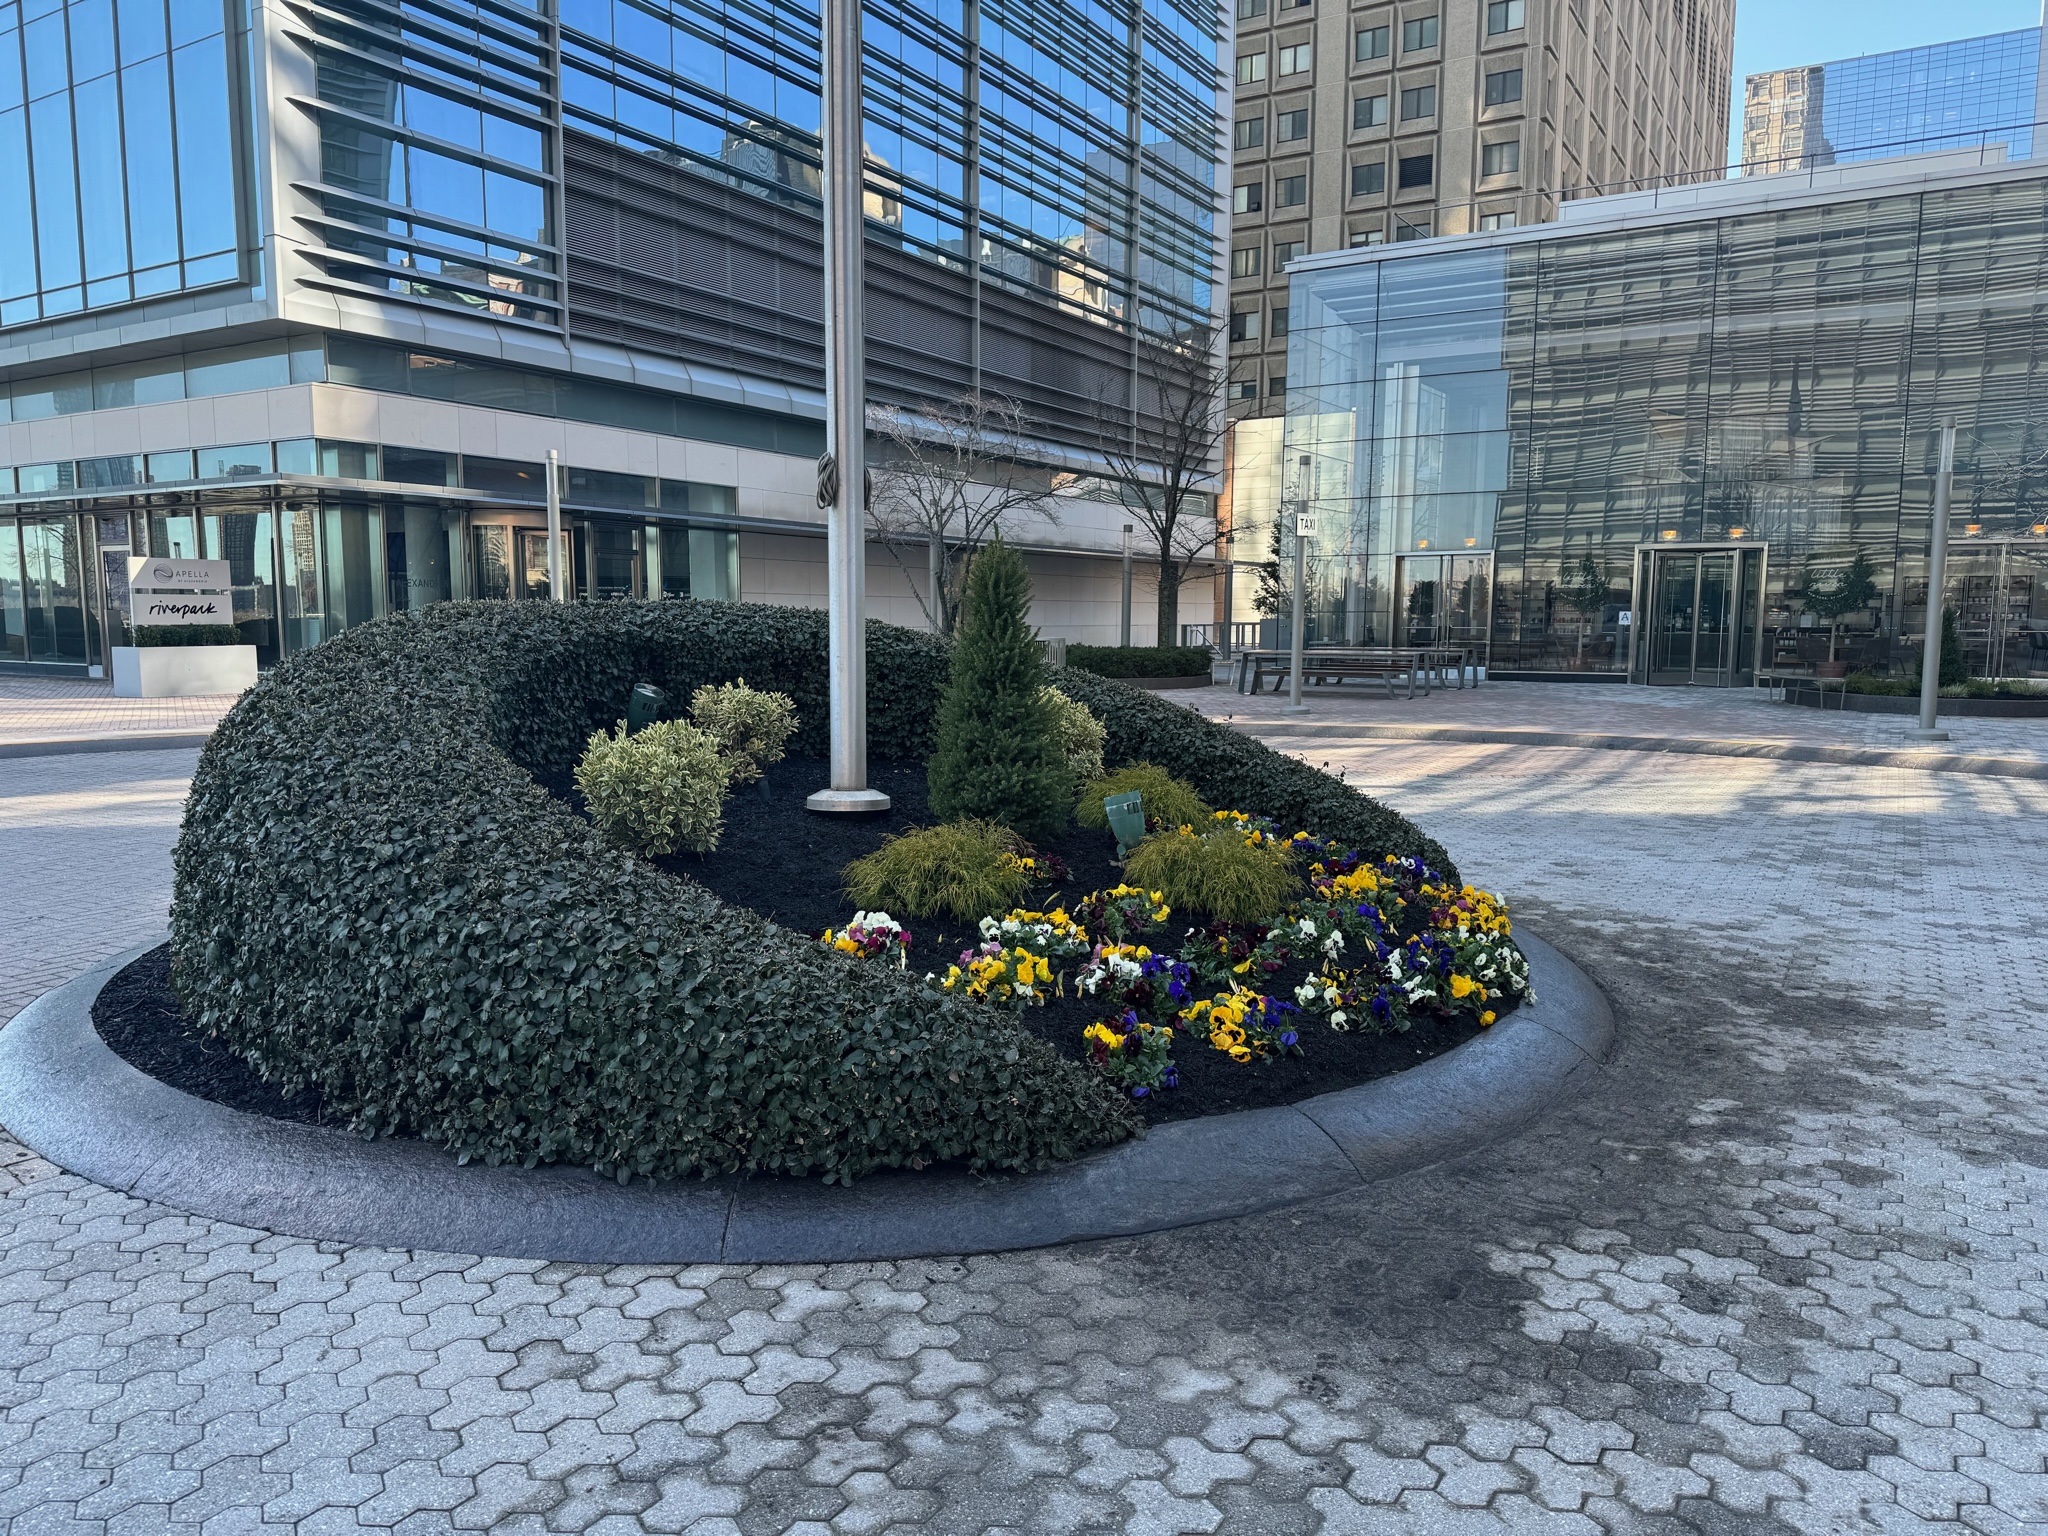 Commercial Landscaping, Irrigation & Turf Installation at New York City Apartment Building